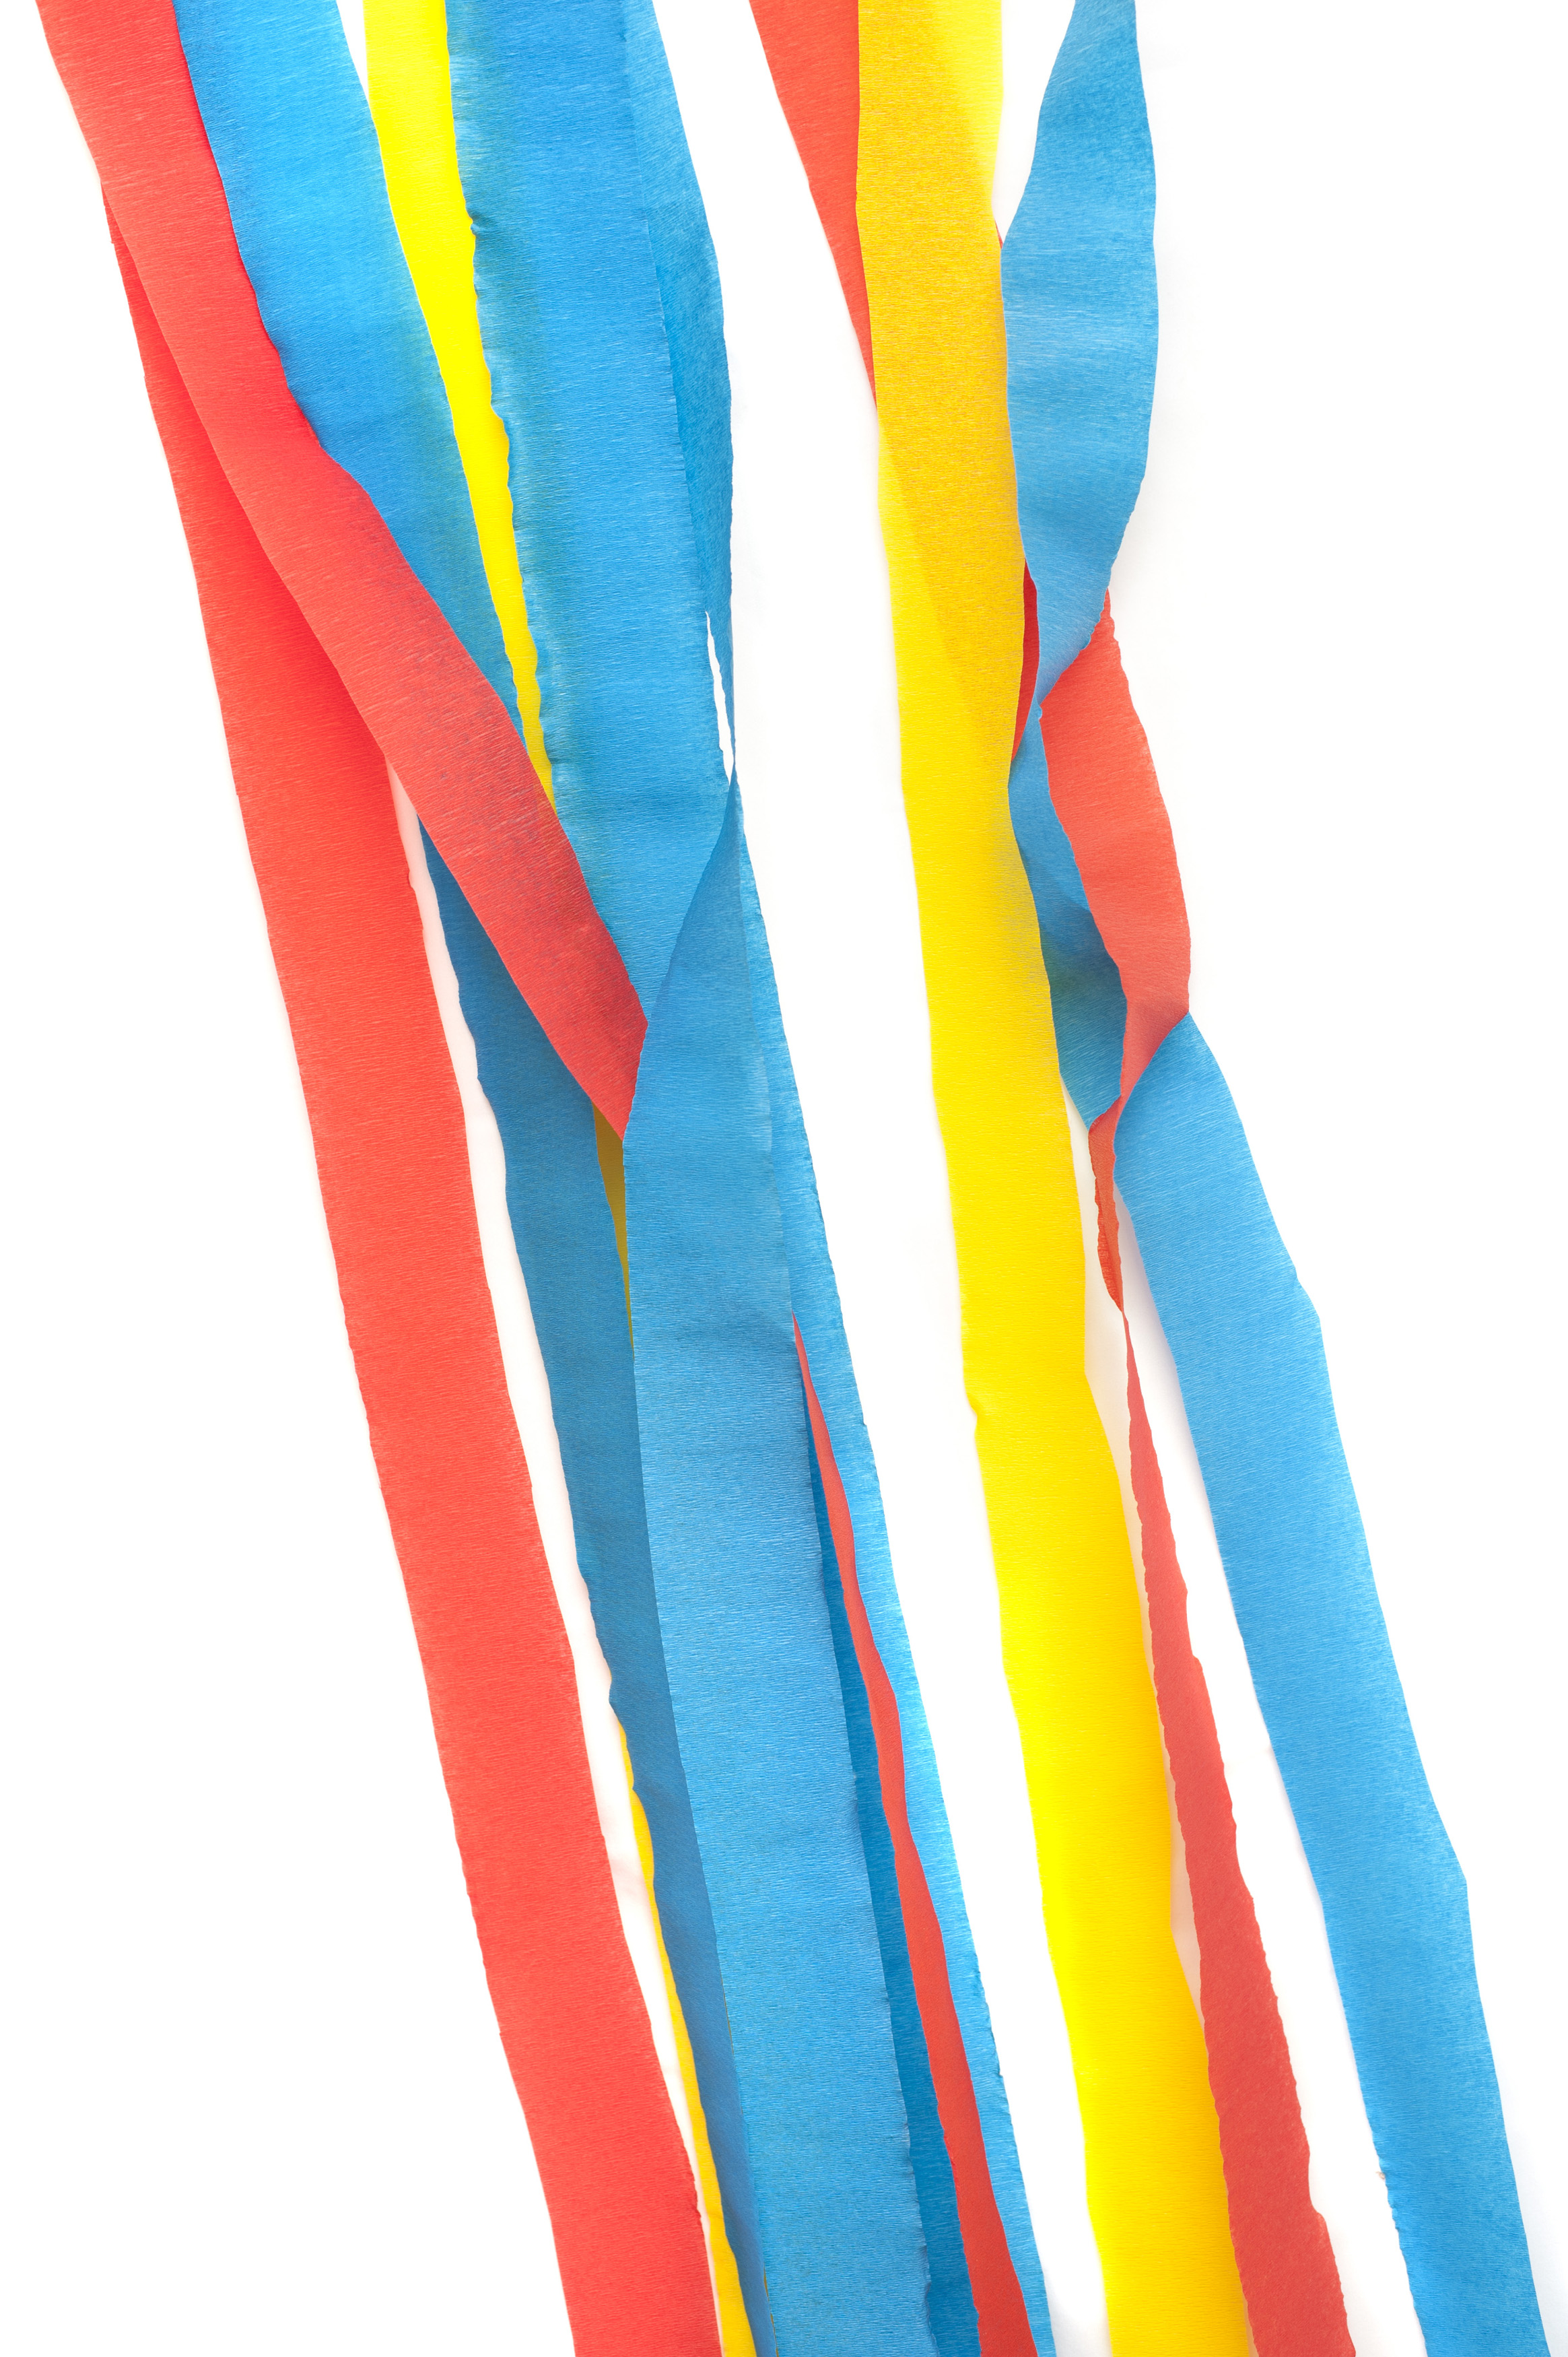 Free Stock Photo 11481 Colored Party Streamers Against White Background